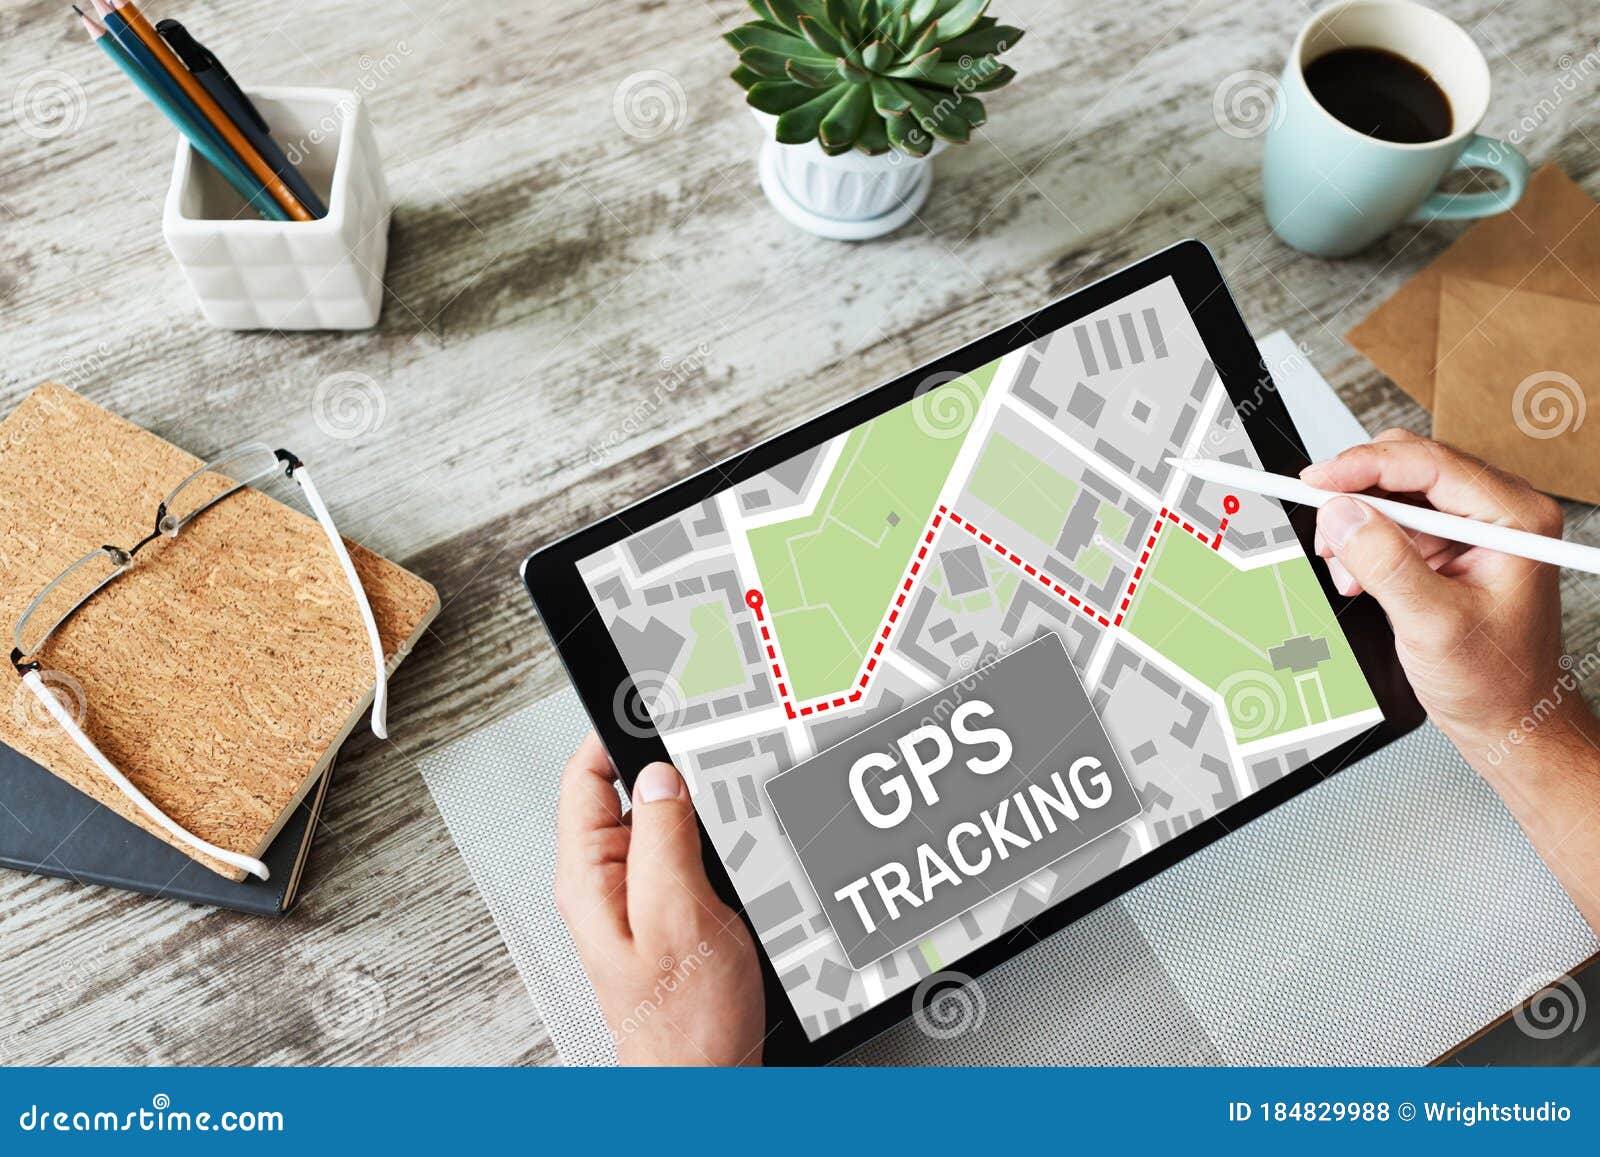 gps global positioning system tracking map on device screen.